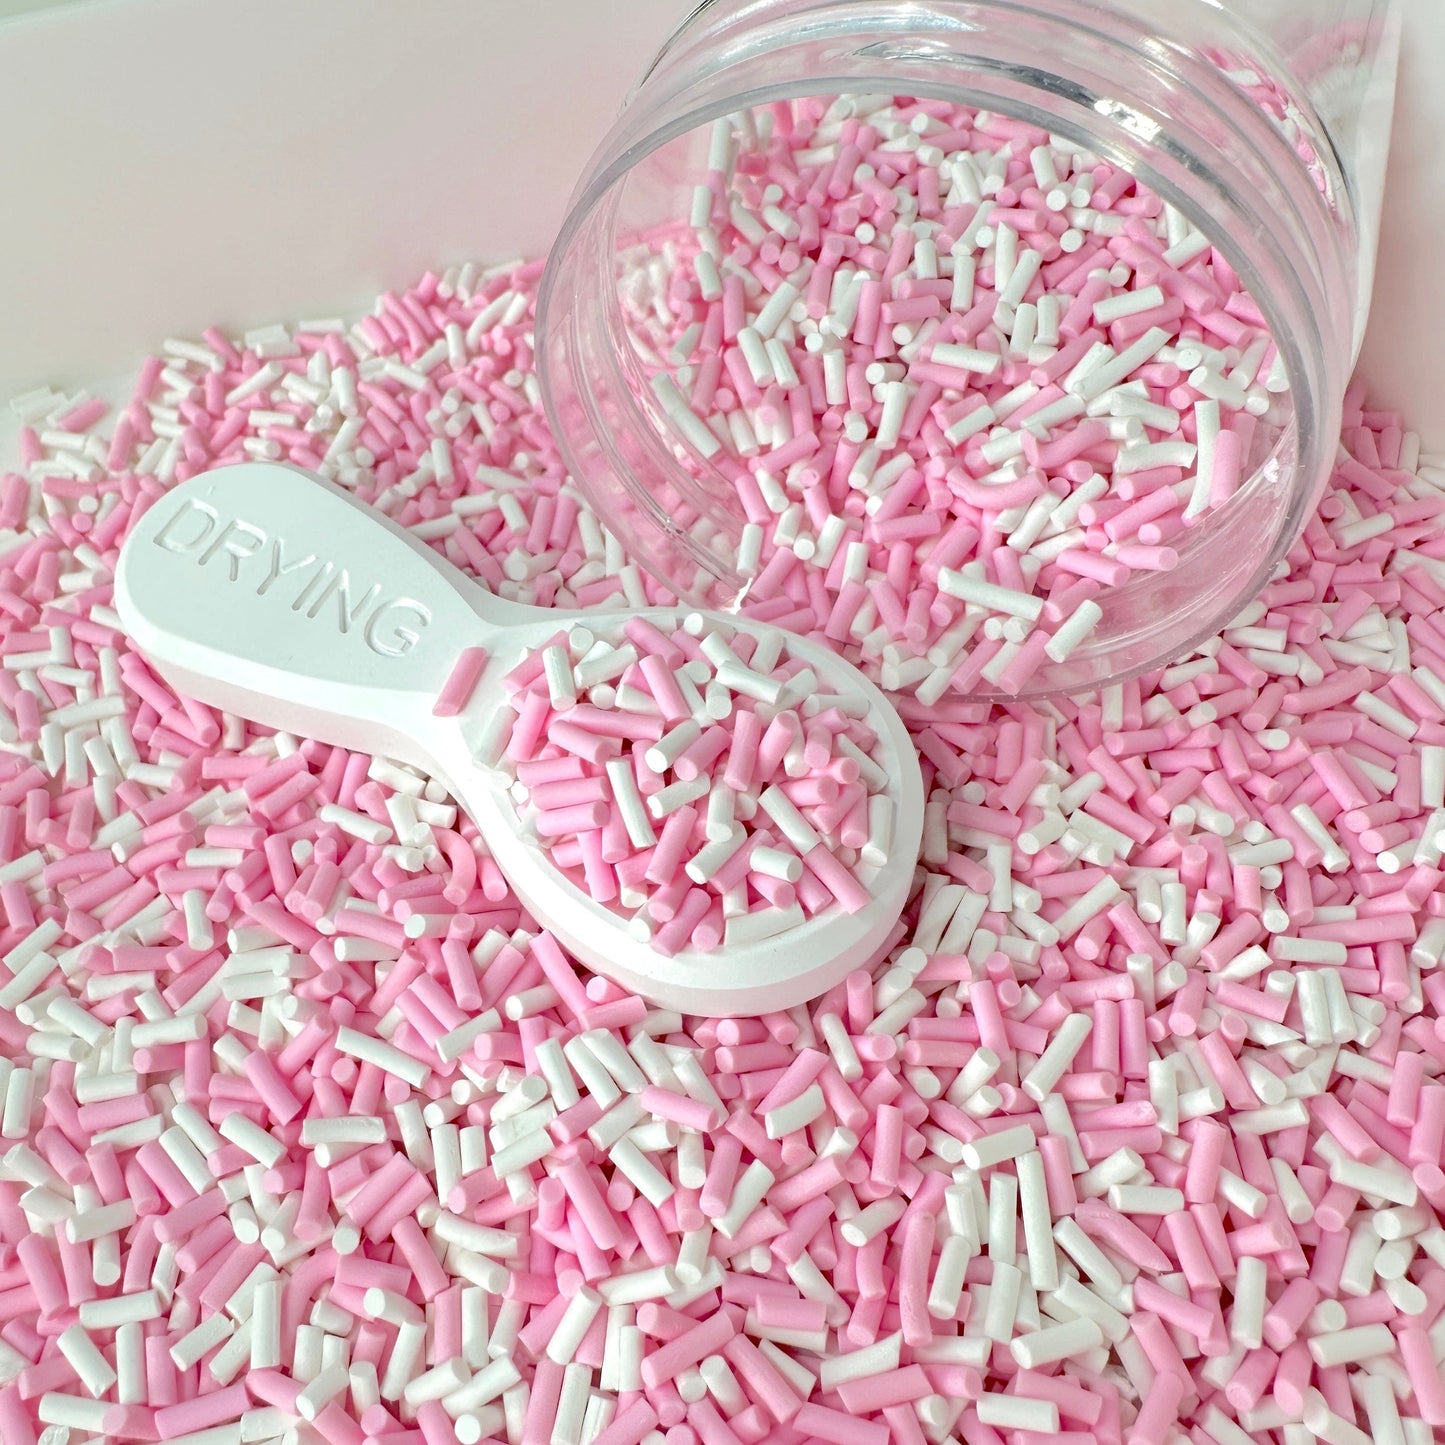 FAKE Ballerina Pink and White Themed Polymer Clay Sprinkle Mix (NOT EDIBLE) D1-02